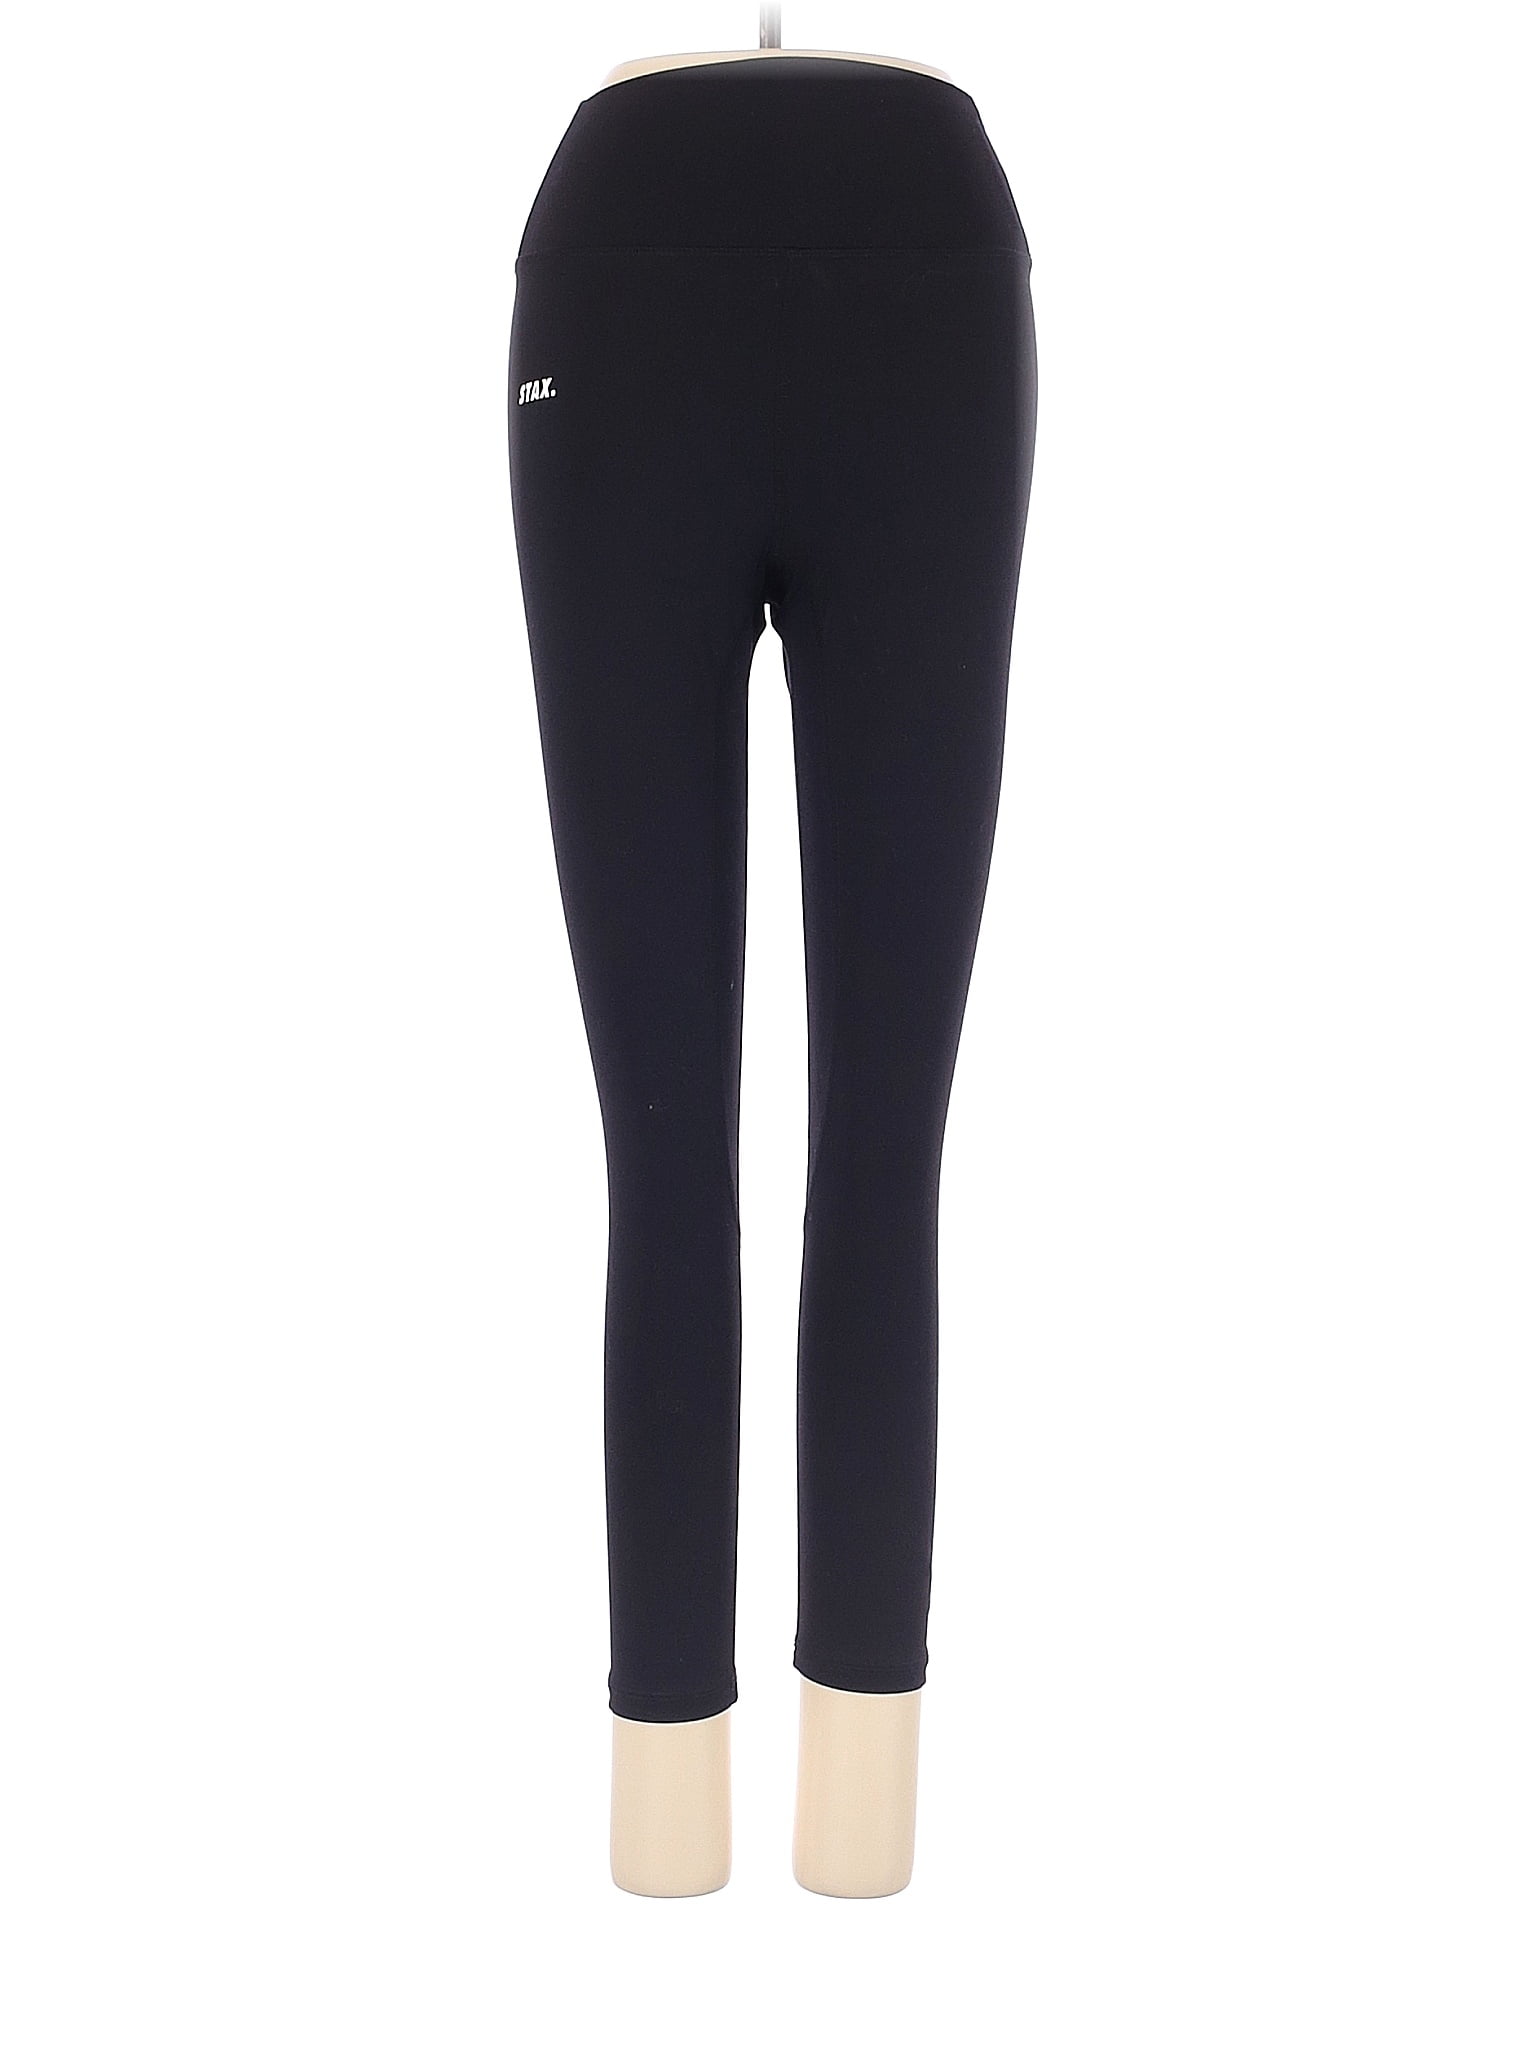 STAX. Women's Activewear On Sale Up To 90% Off Retail